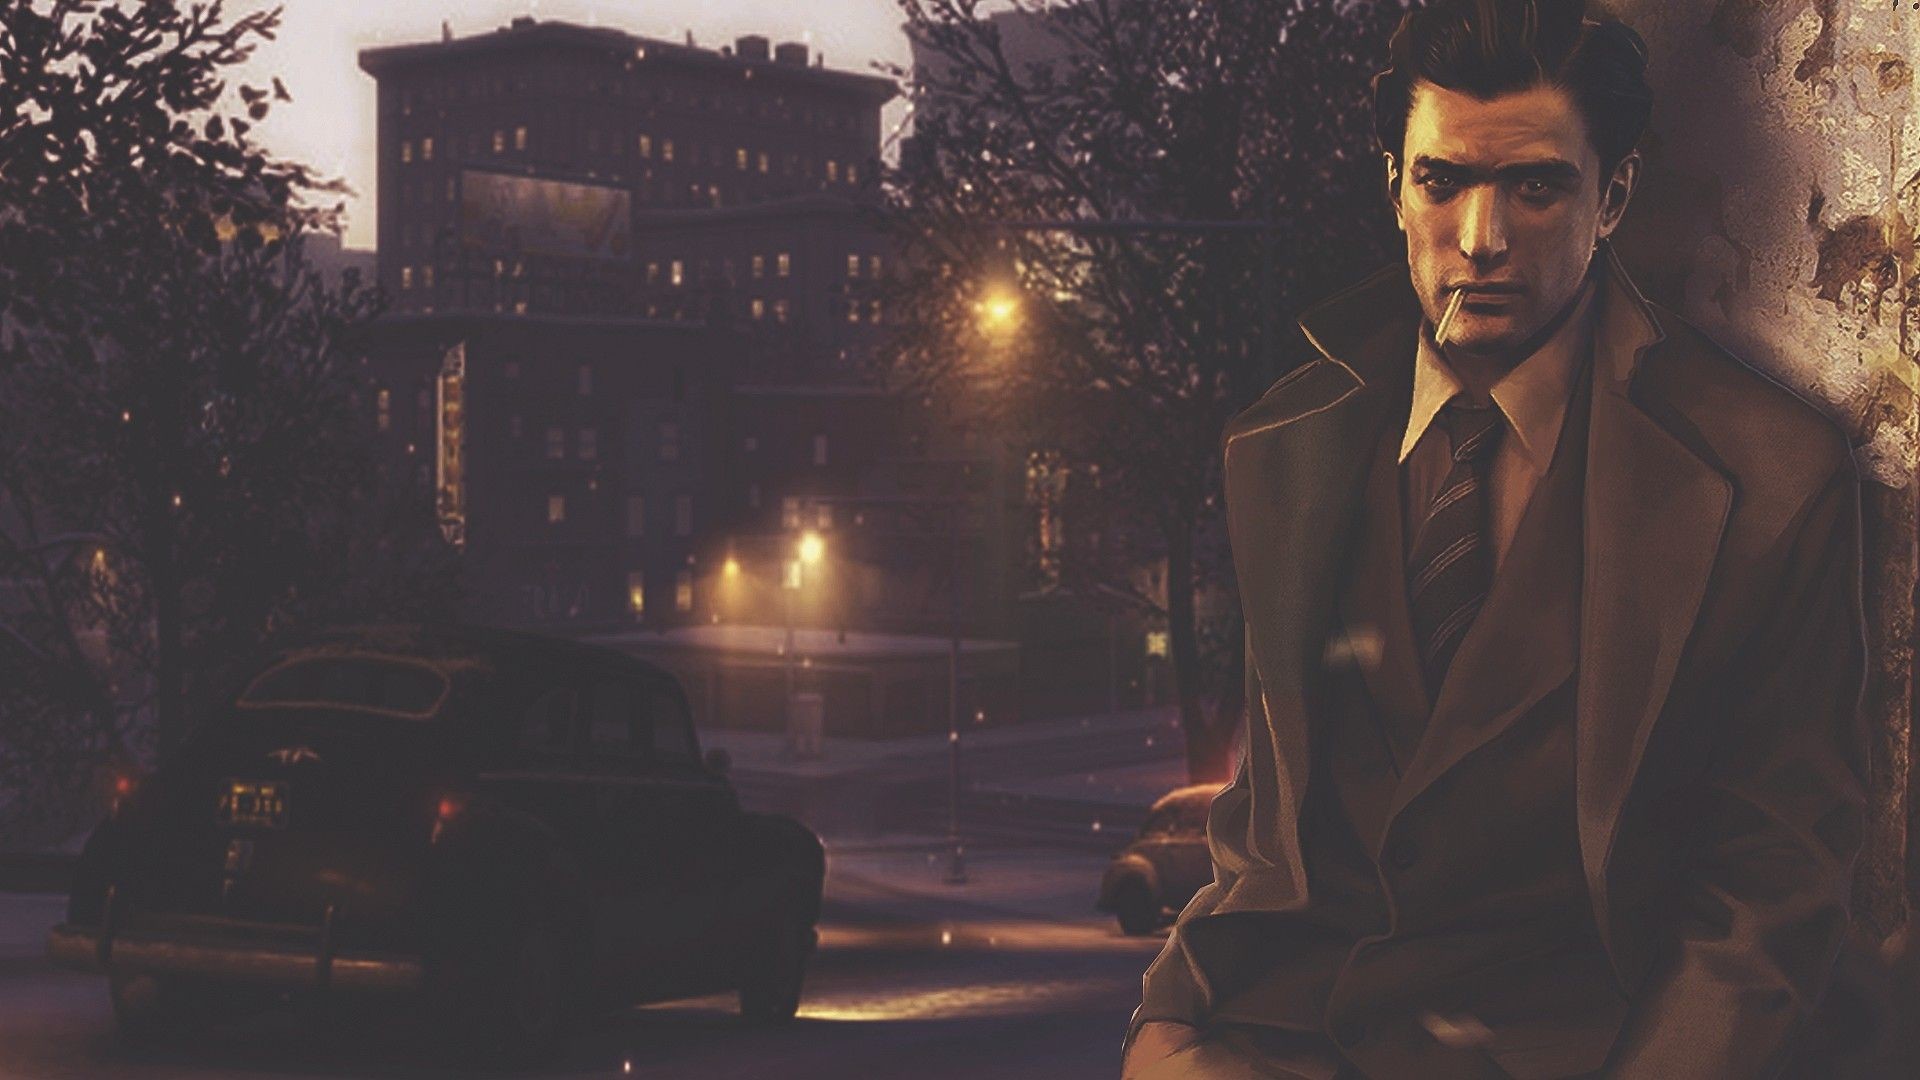 1920x1080 Christmas mafia 2 mobsters old city game gangsters (, mafia,  mobsters, old, city, game, gangsters) via www.allwallpaper.in